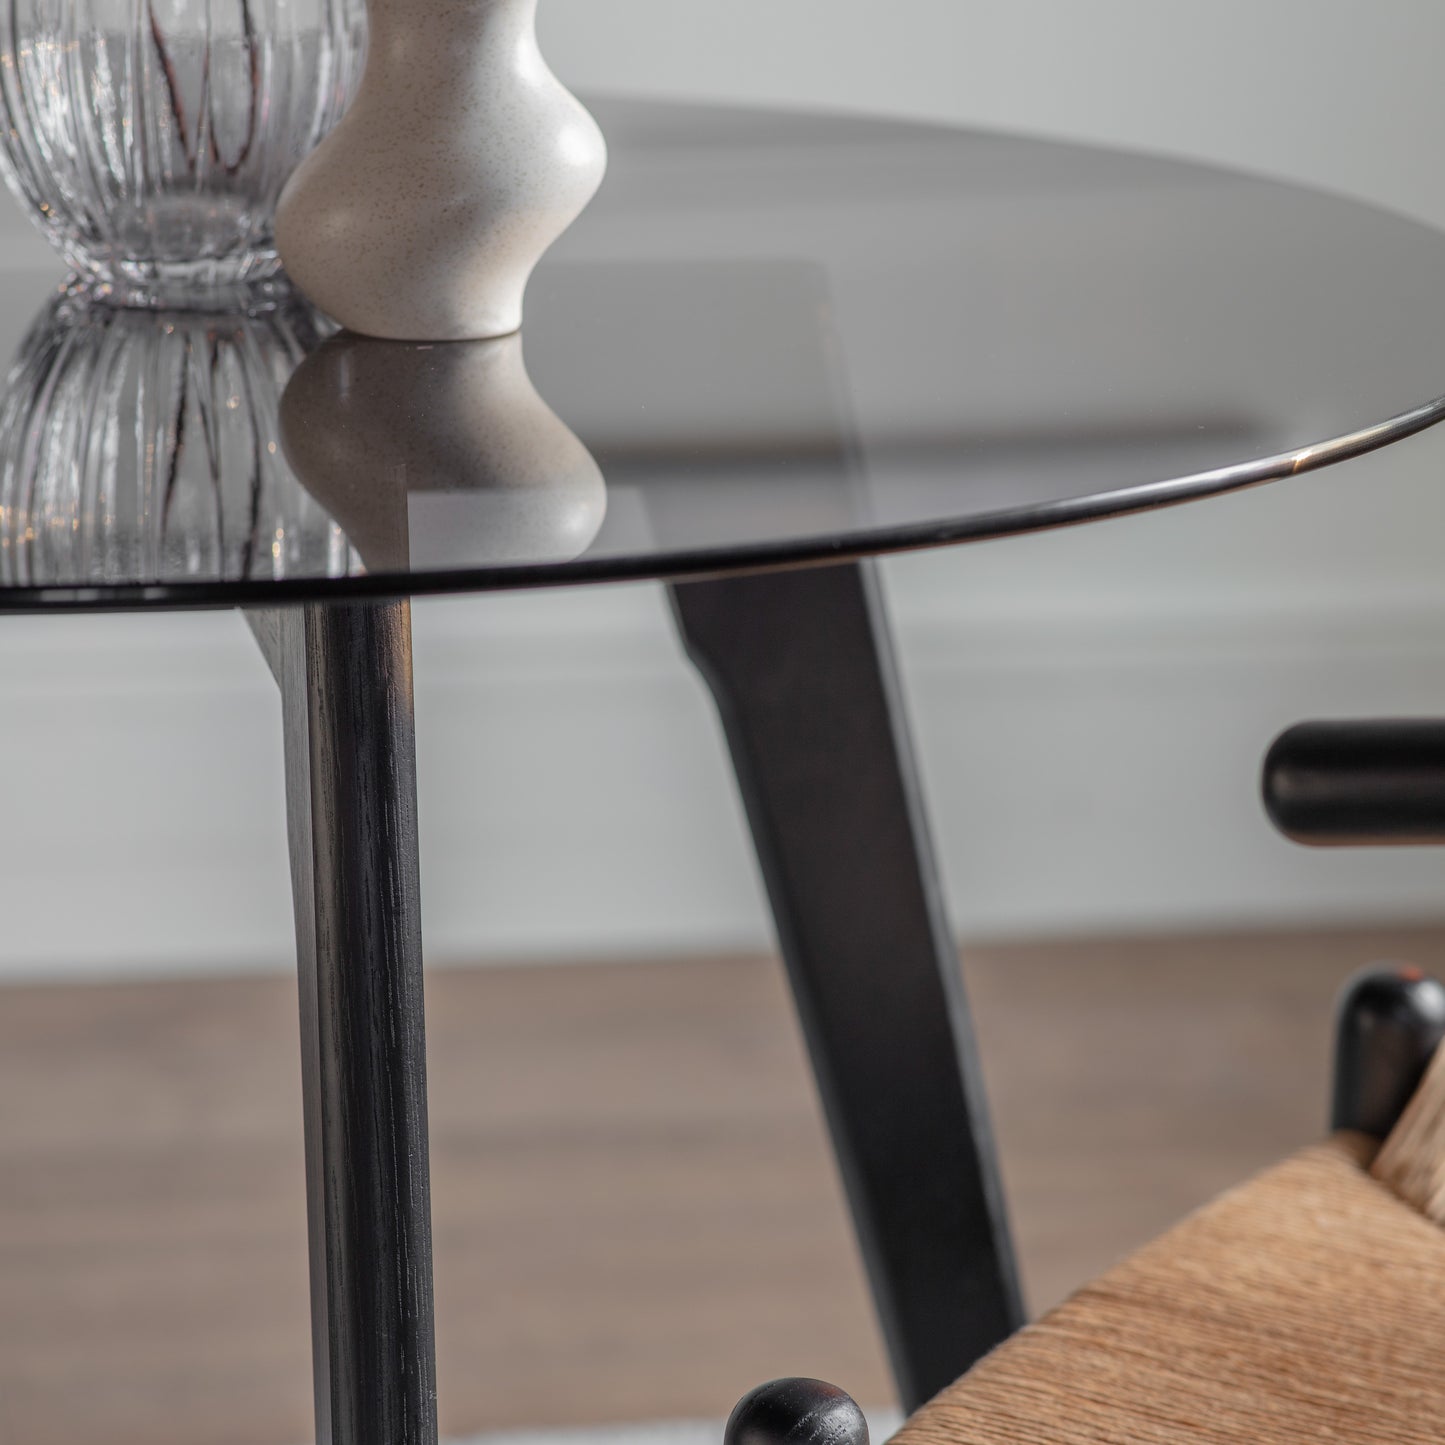 Load image into Gallery viewer, A stylish Ashprington Round Dining Table in Black with a glass top for interior decor or home furniture.
